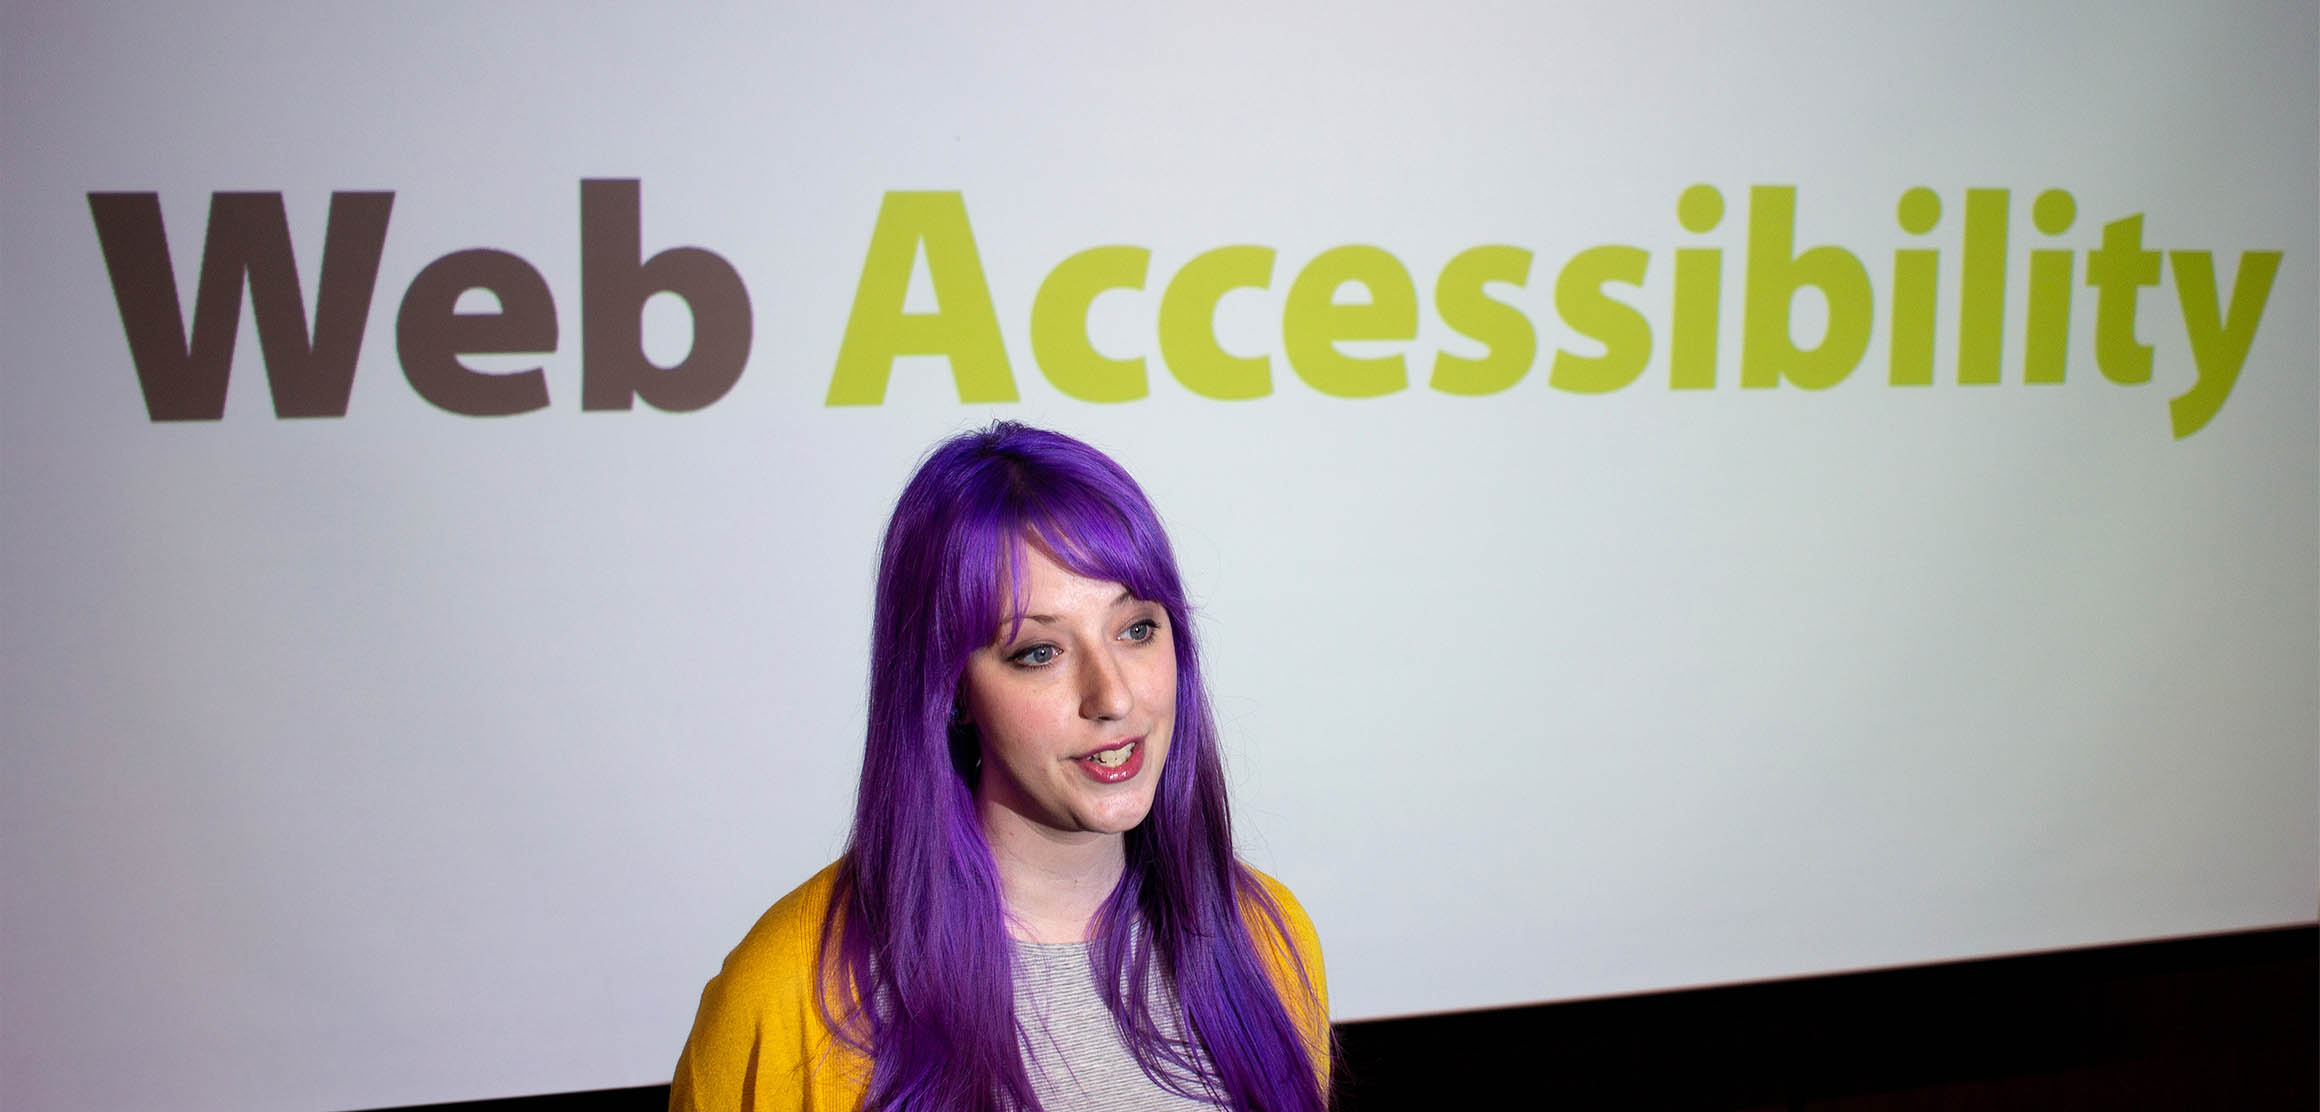 Bekah speaking in front of a projector with the words Web Accessibility.